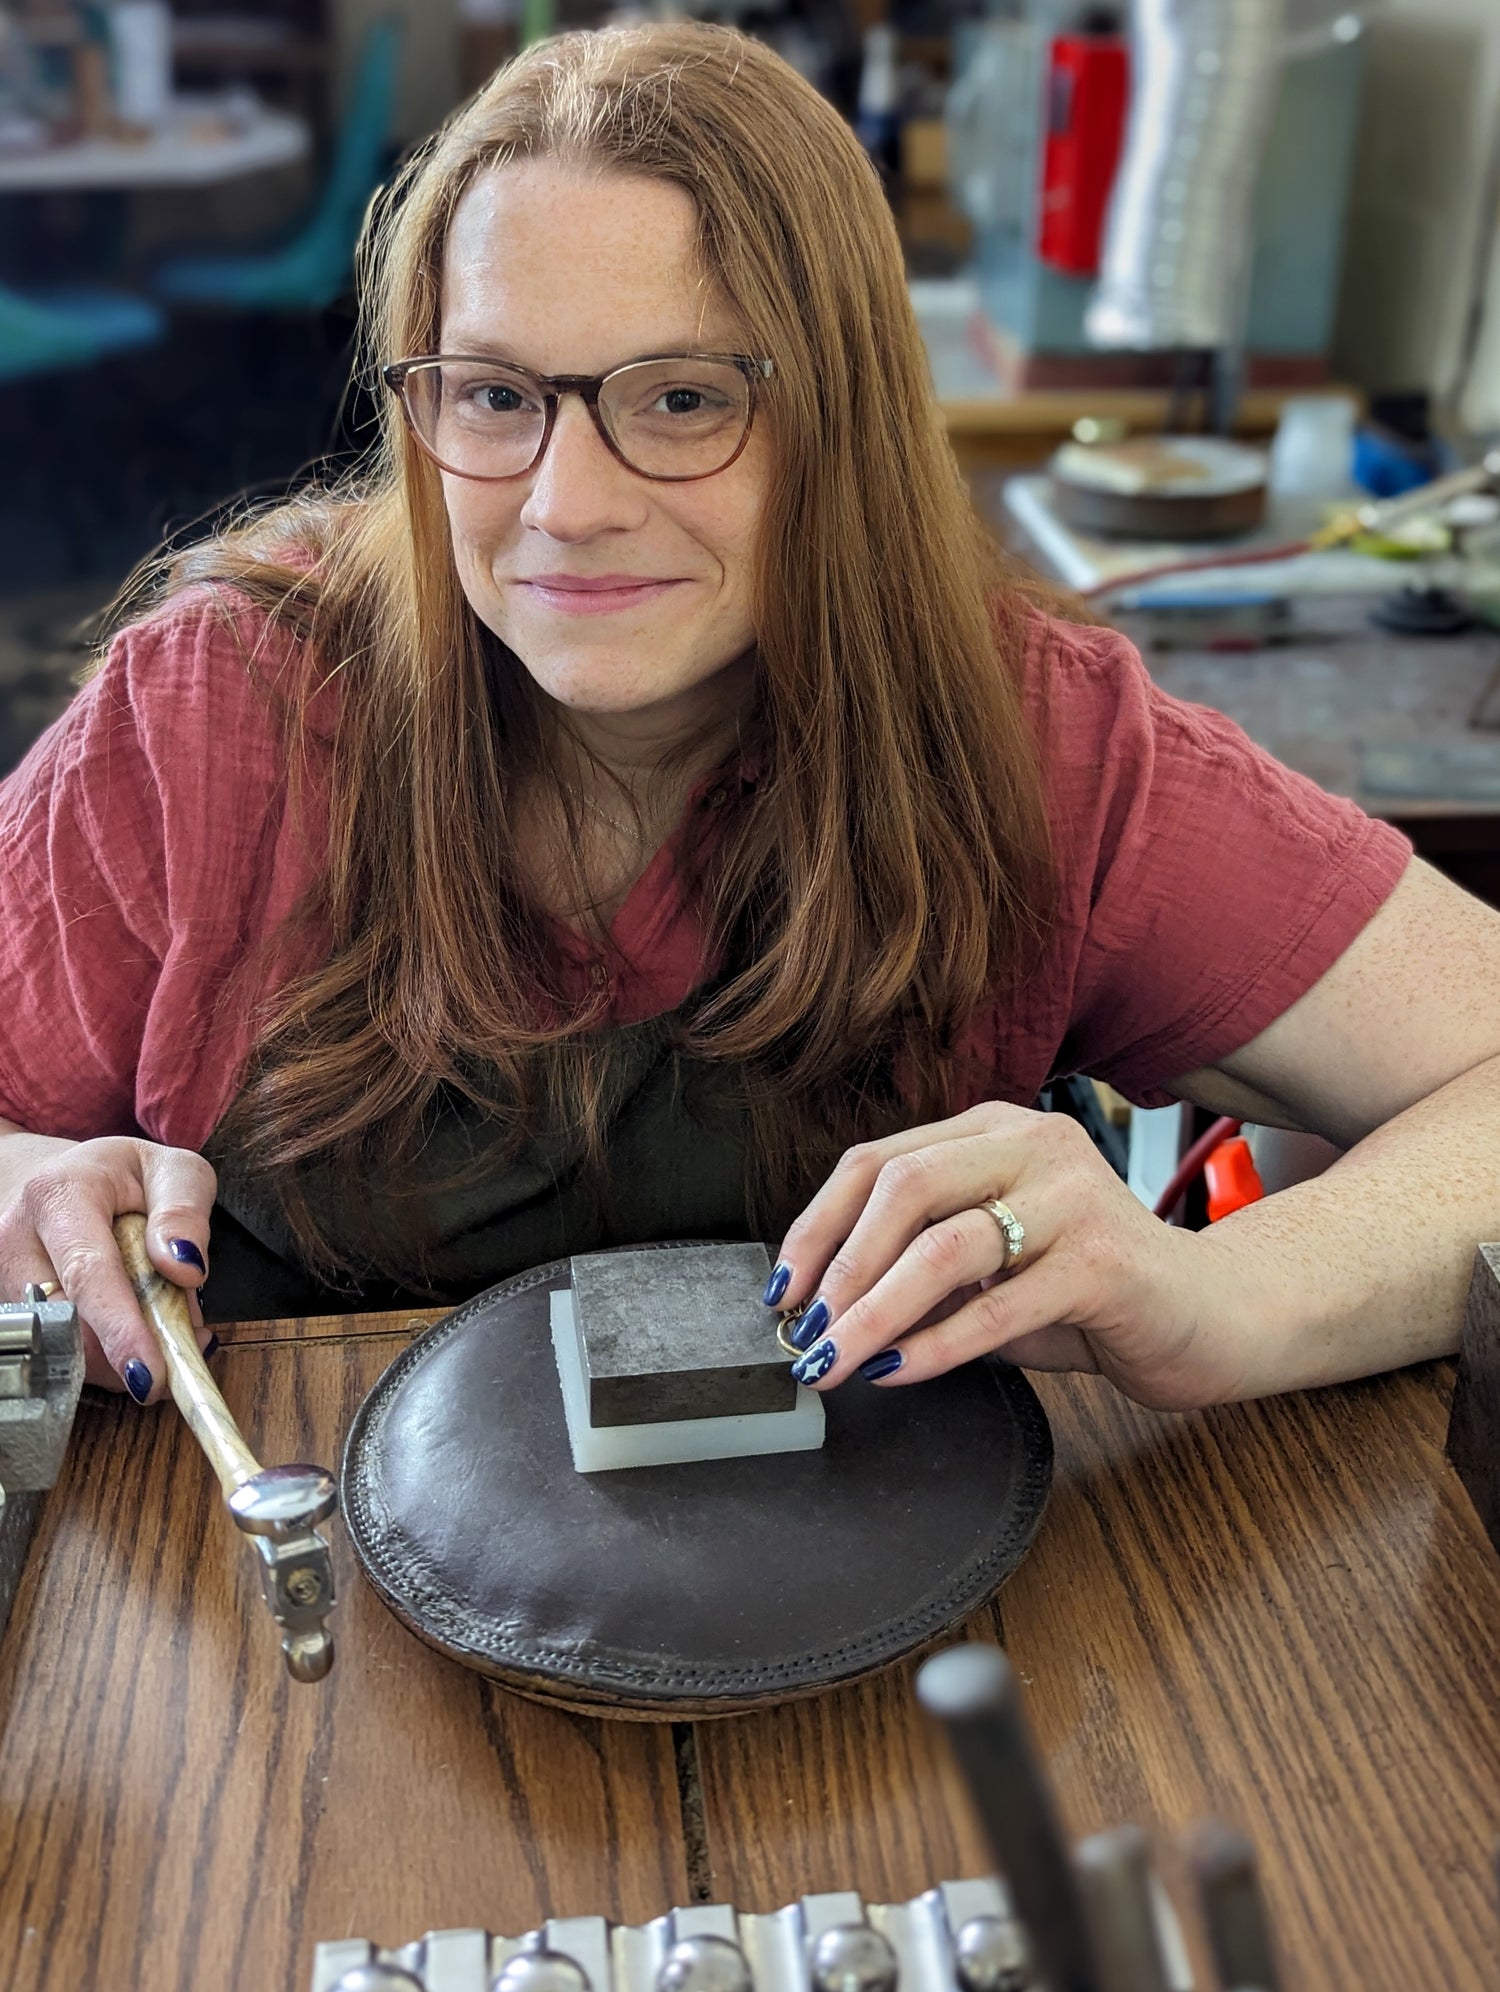 The goldmsmith, Tess Pell, is sitting at a table in front of her tools. She is holding a hammer and has long red hair, freckles and glasses. She is working on a ring and holding a hammer.